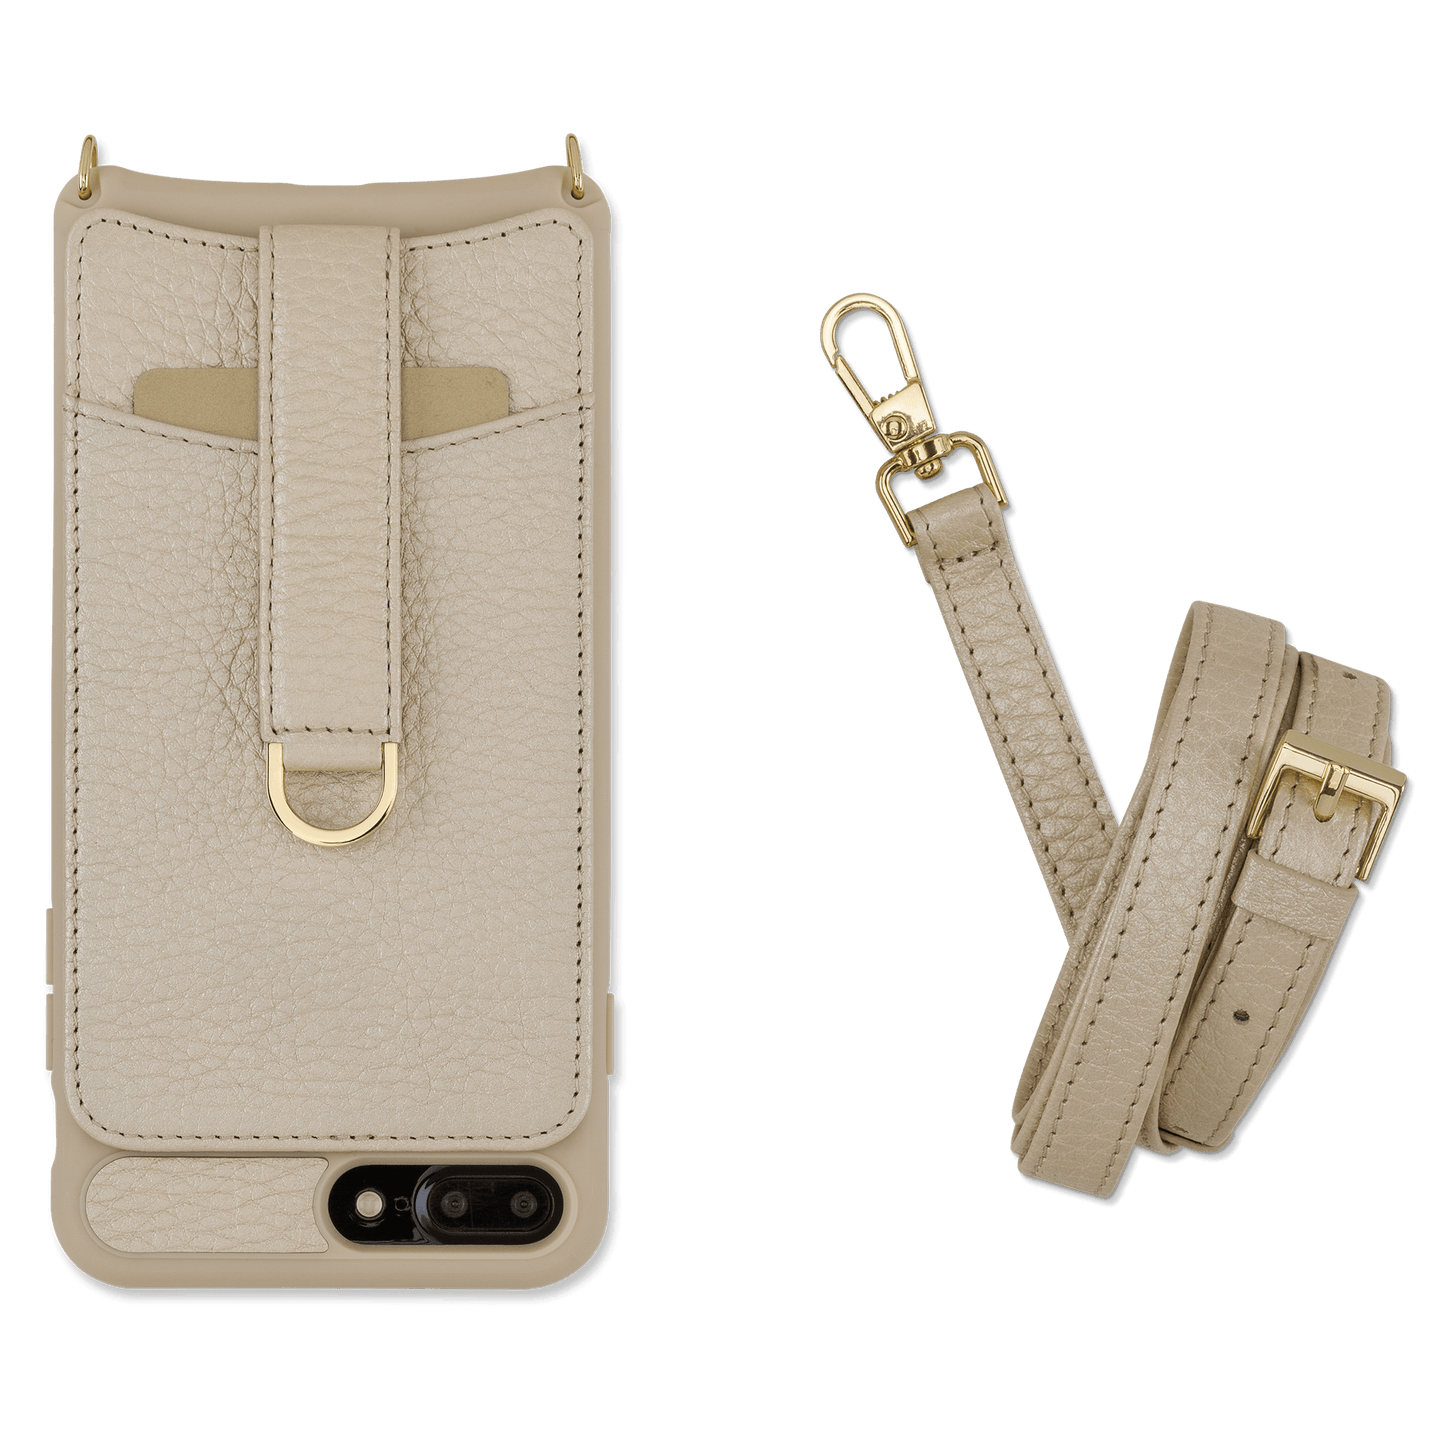 Chic Protective iPhone 7 Plus Chain